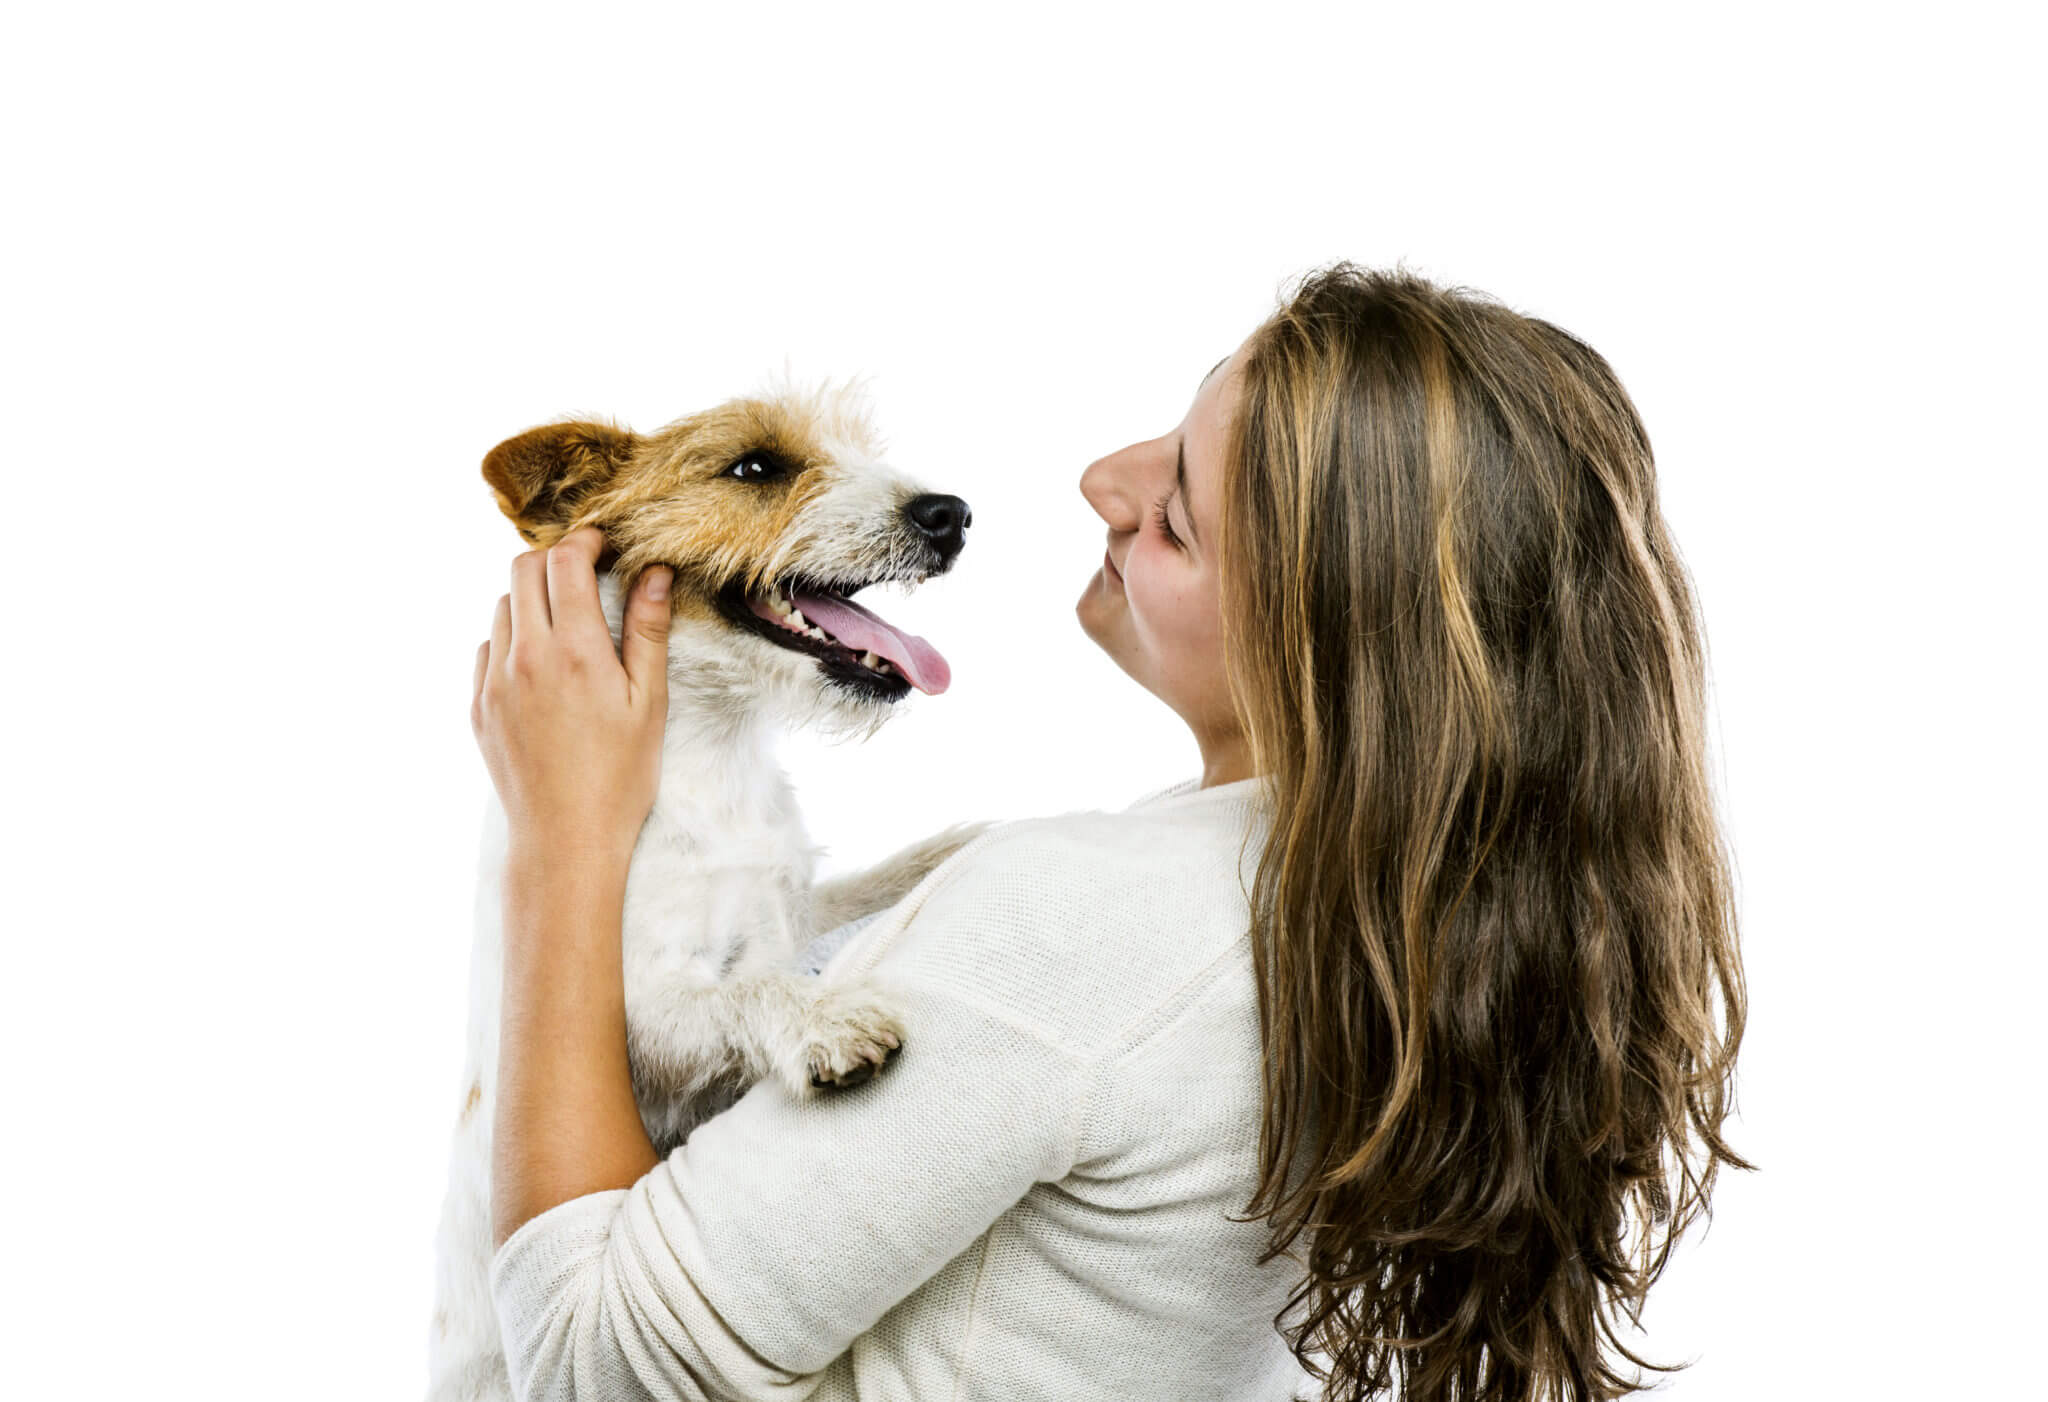 graphicstock-young-woman-holding-her-cute-parson-russell-terrier-dog-isolated-on-white-background